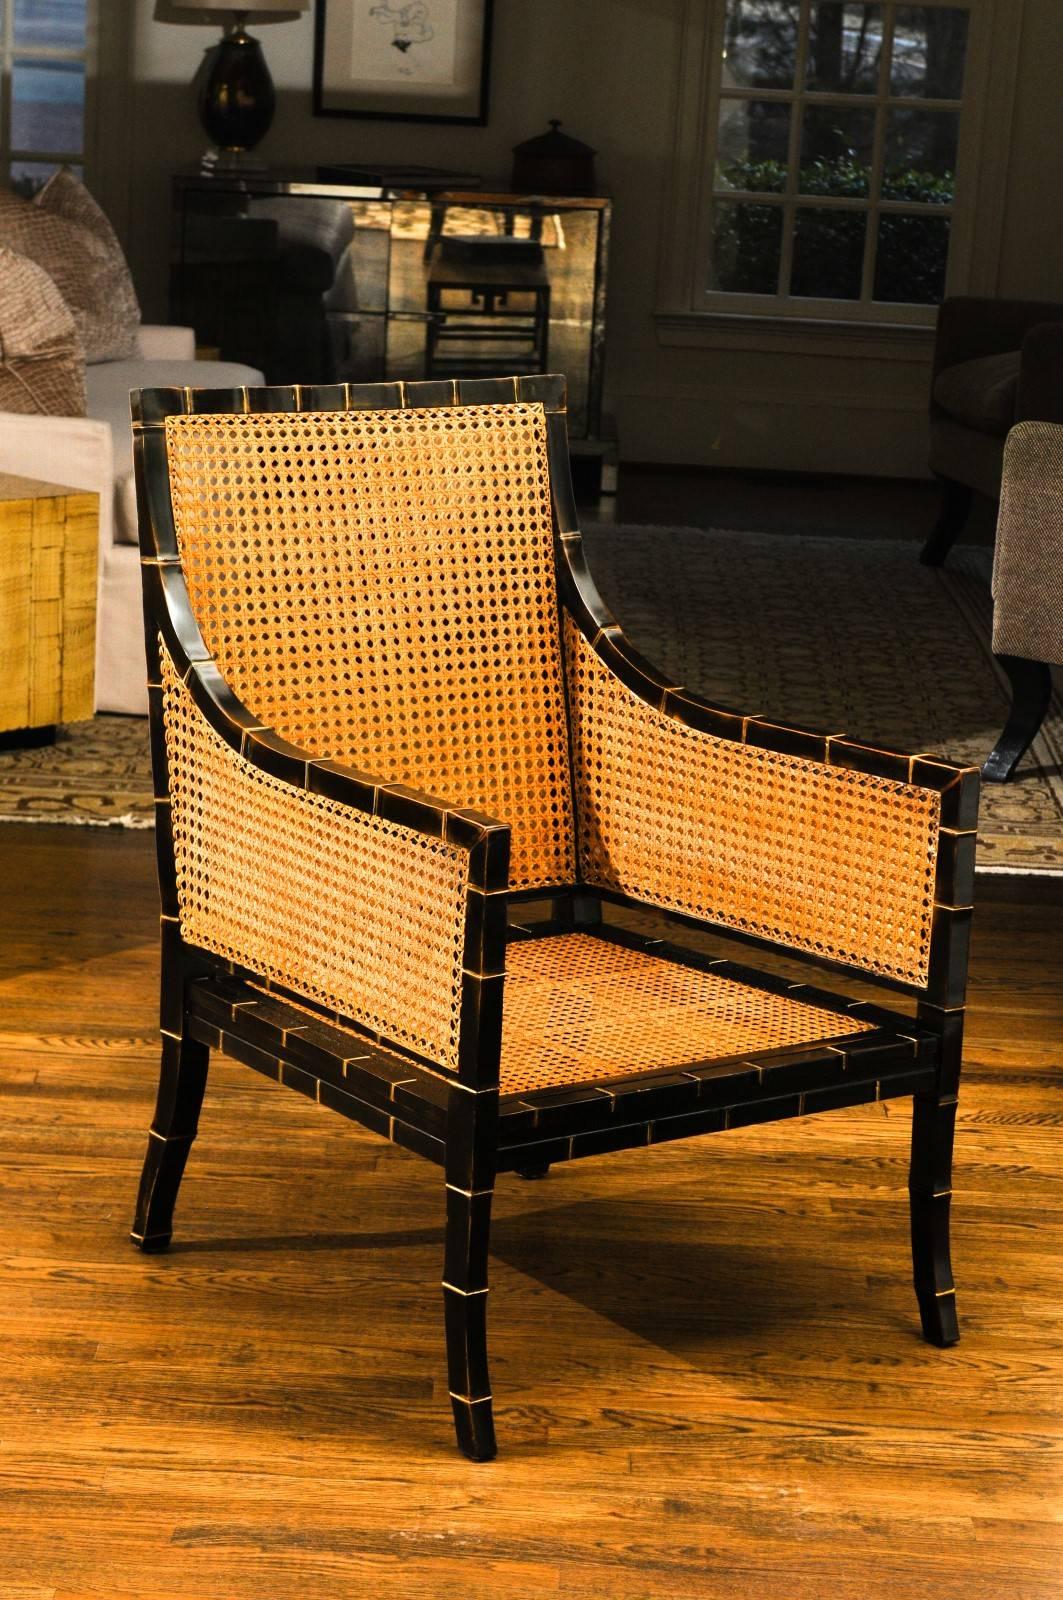 A stunning pair of double sided cane club chairs, circa 1970. Handsome large scale ebony form with faux-bamboo detail accented in gold leaf; subtle Klismos leg detail. Heavy, expertly crafted and aged to absolute perfection. Pieces designed to